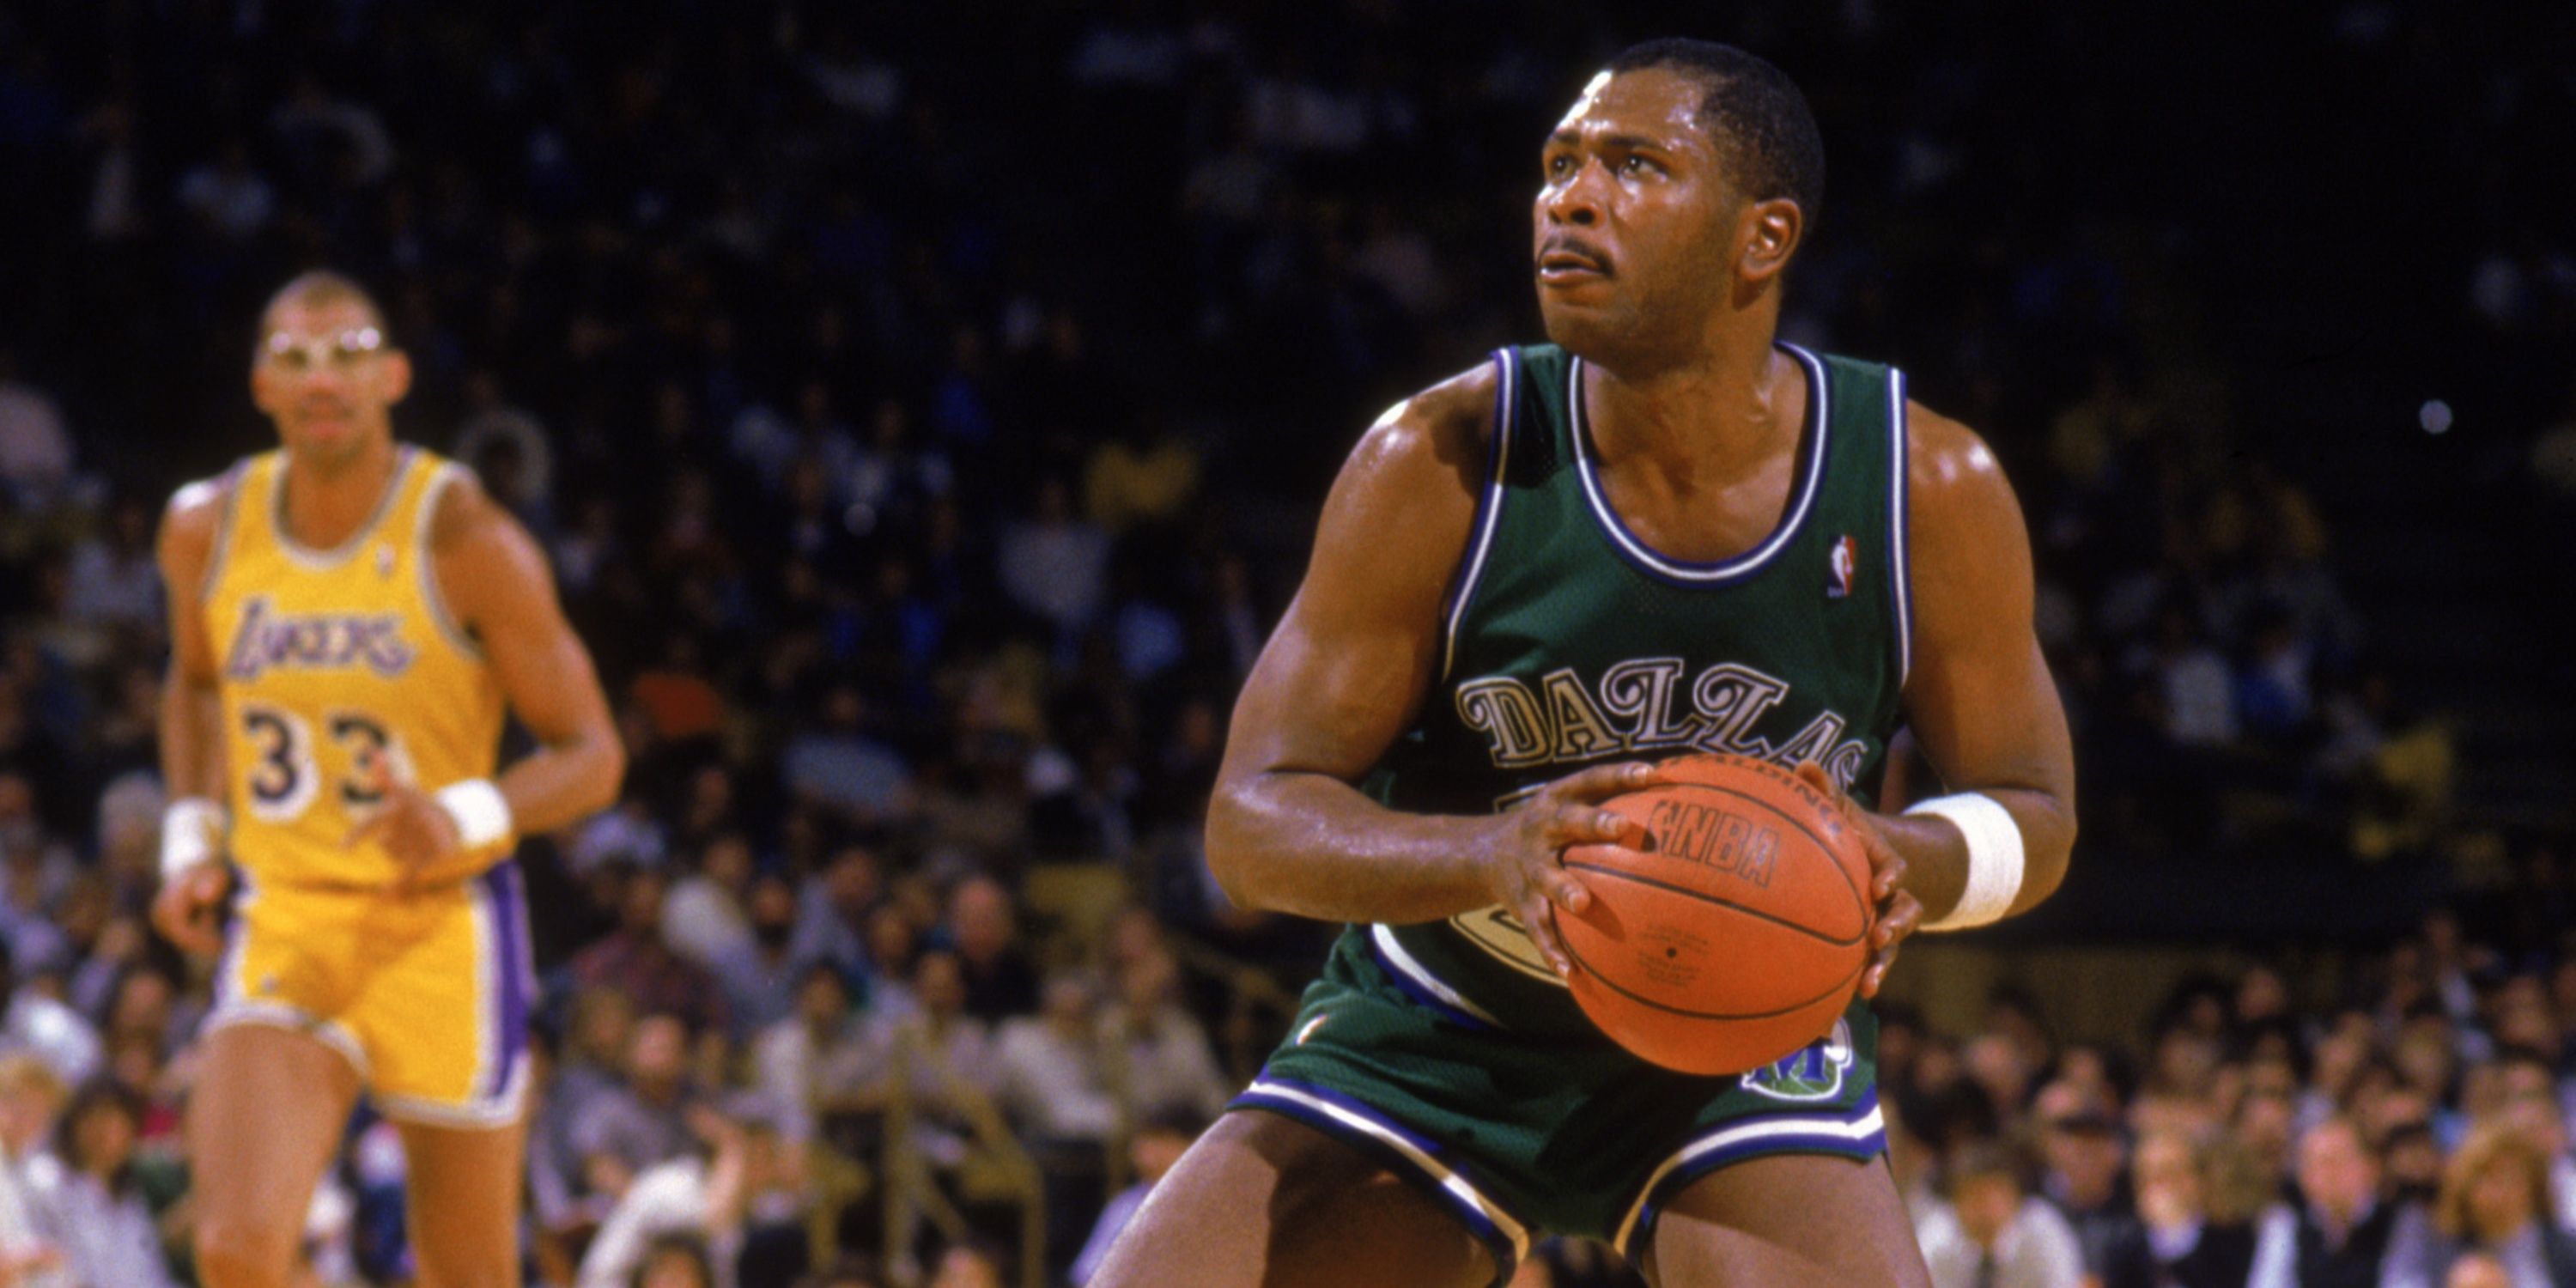 10 Former Nba Legends Who Deserve To Be In The Hall Of Fame